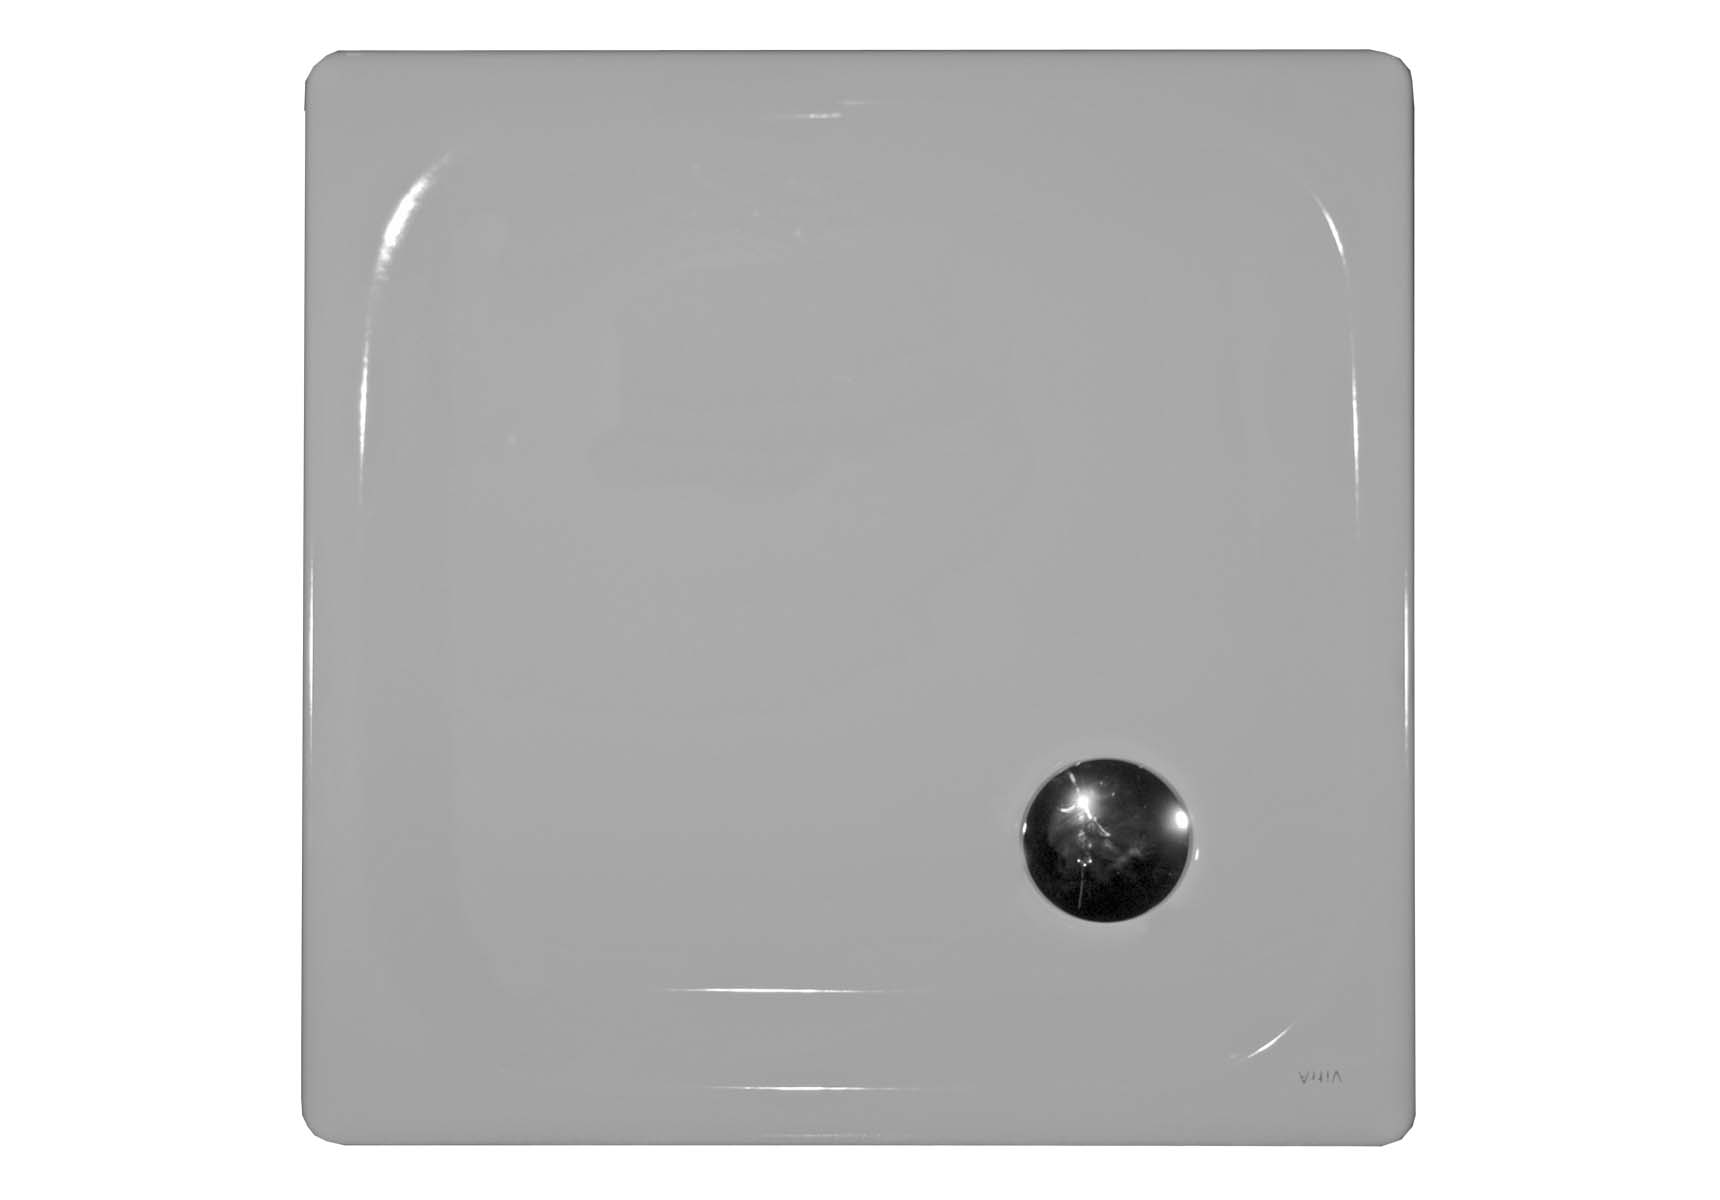 Generic Square 80x80 cm Steel Shower Tray, 3.5 Mm, H:2.5 cm, 90 Mm Waste, Sound Proofing Pad